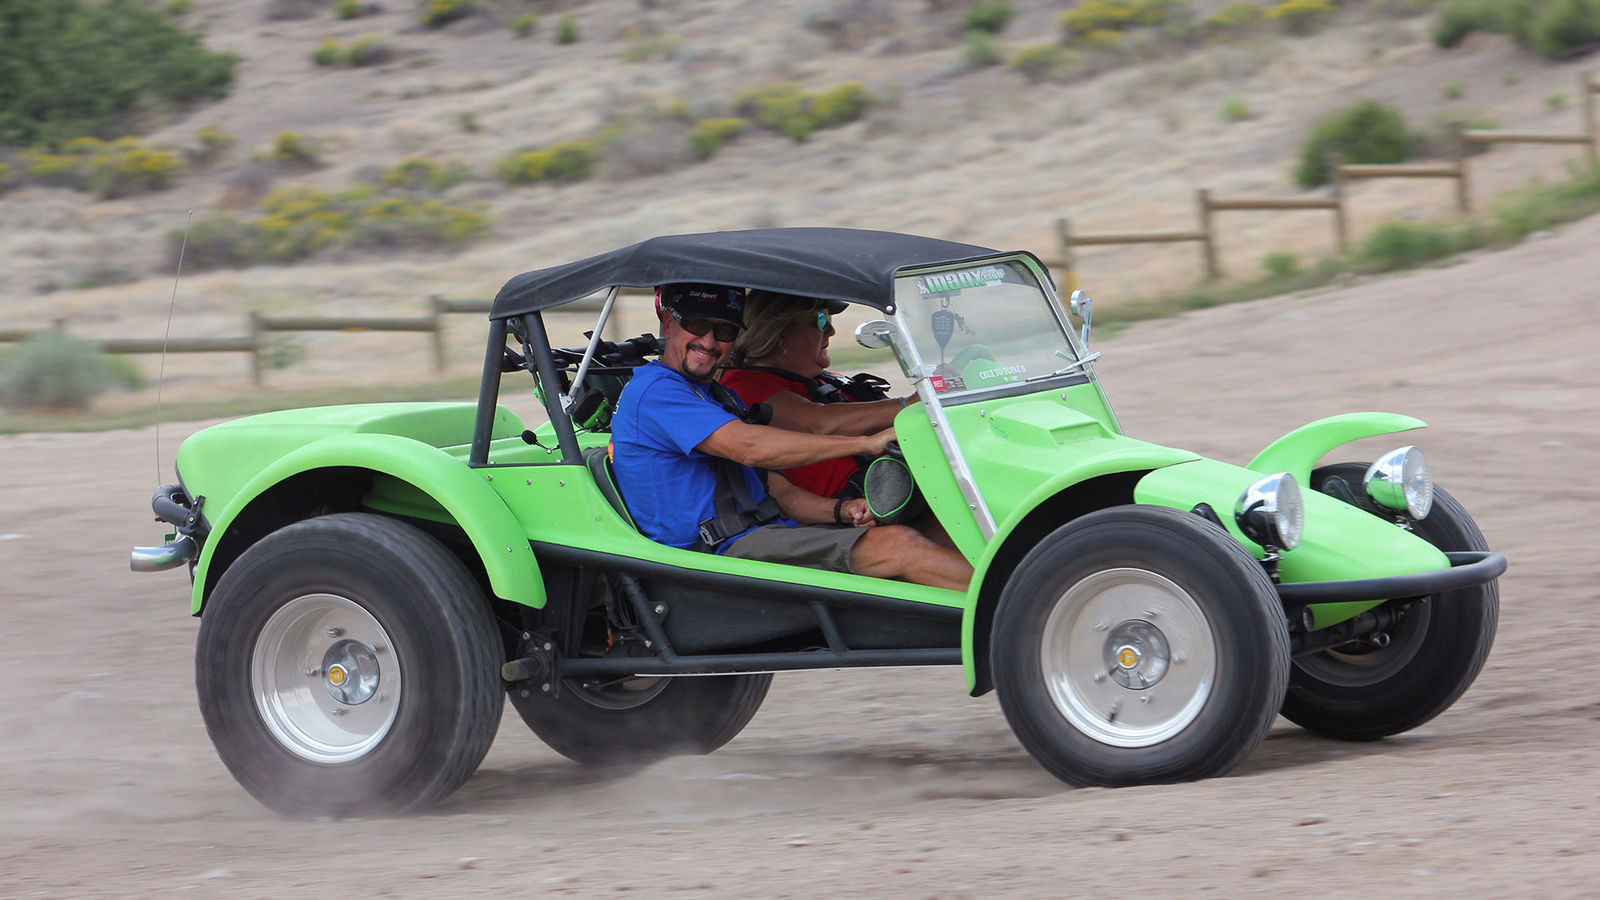 Story: Dune Buggy: Small Car, Boundless Freedom